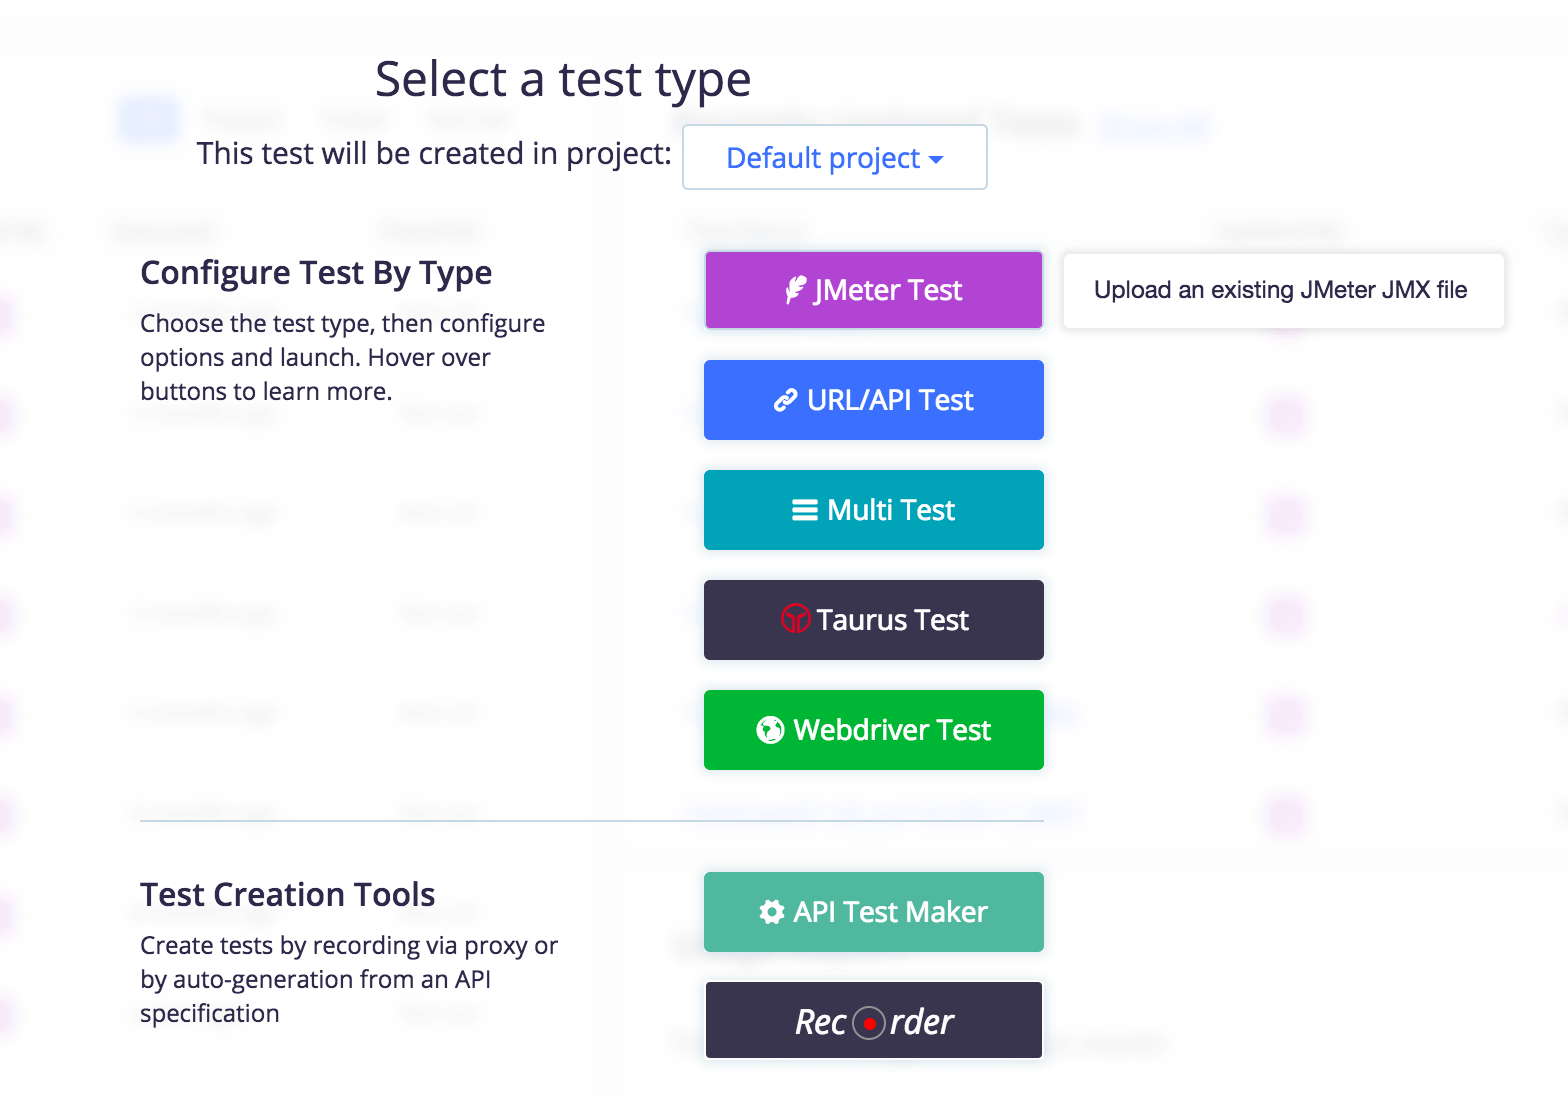 Scale your JMeter test